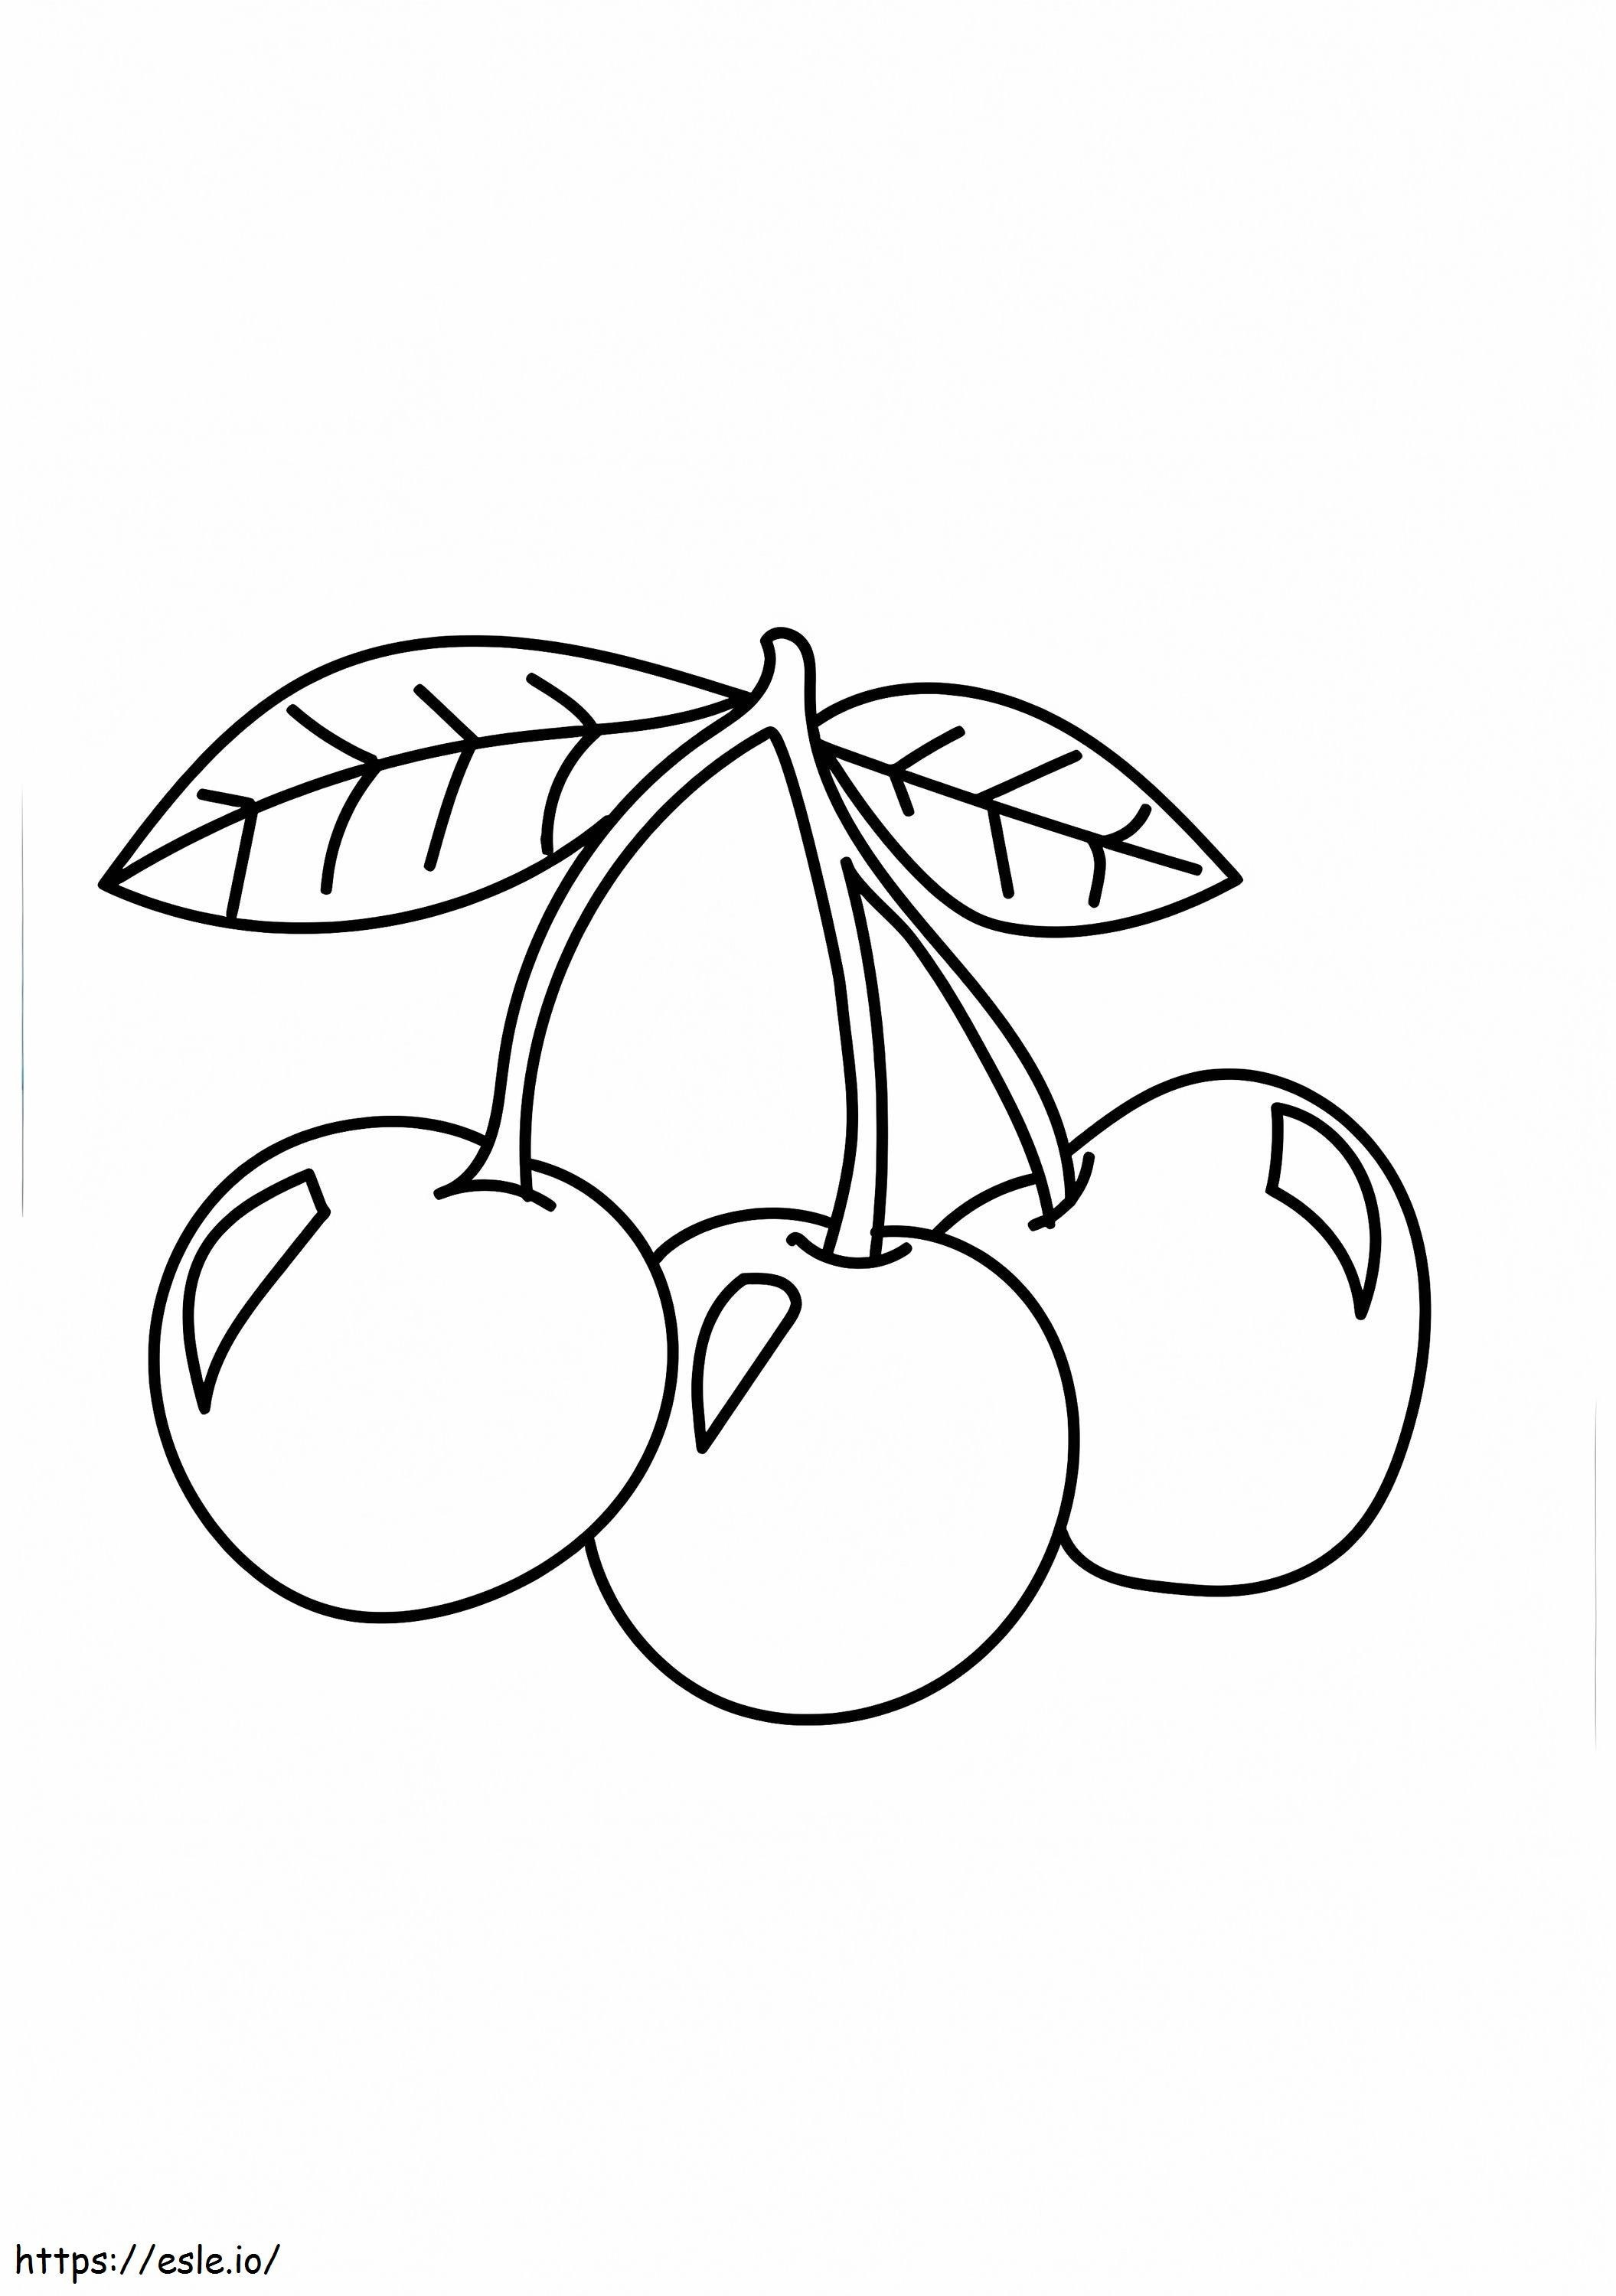 The Cherries 17 A4 Copy coloring page